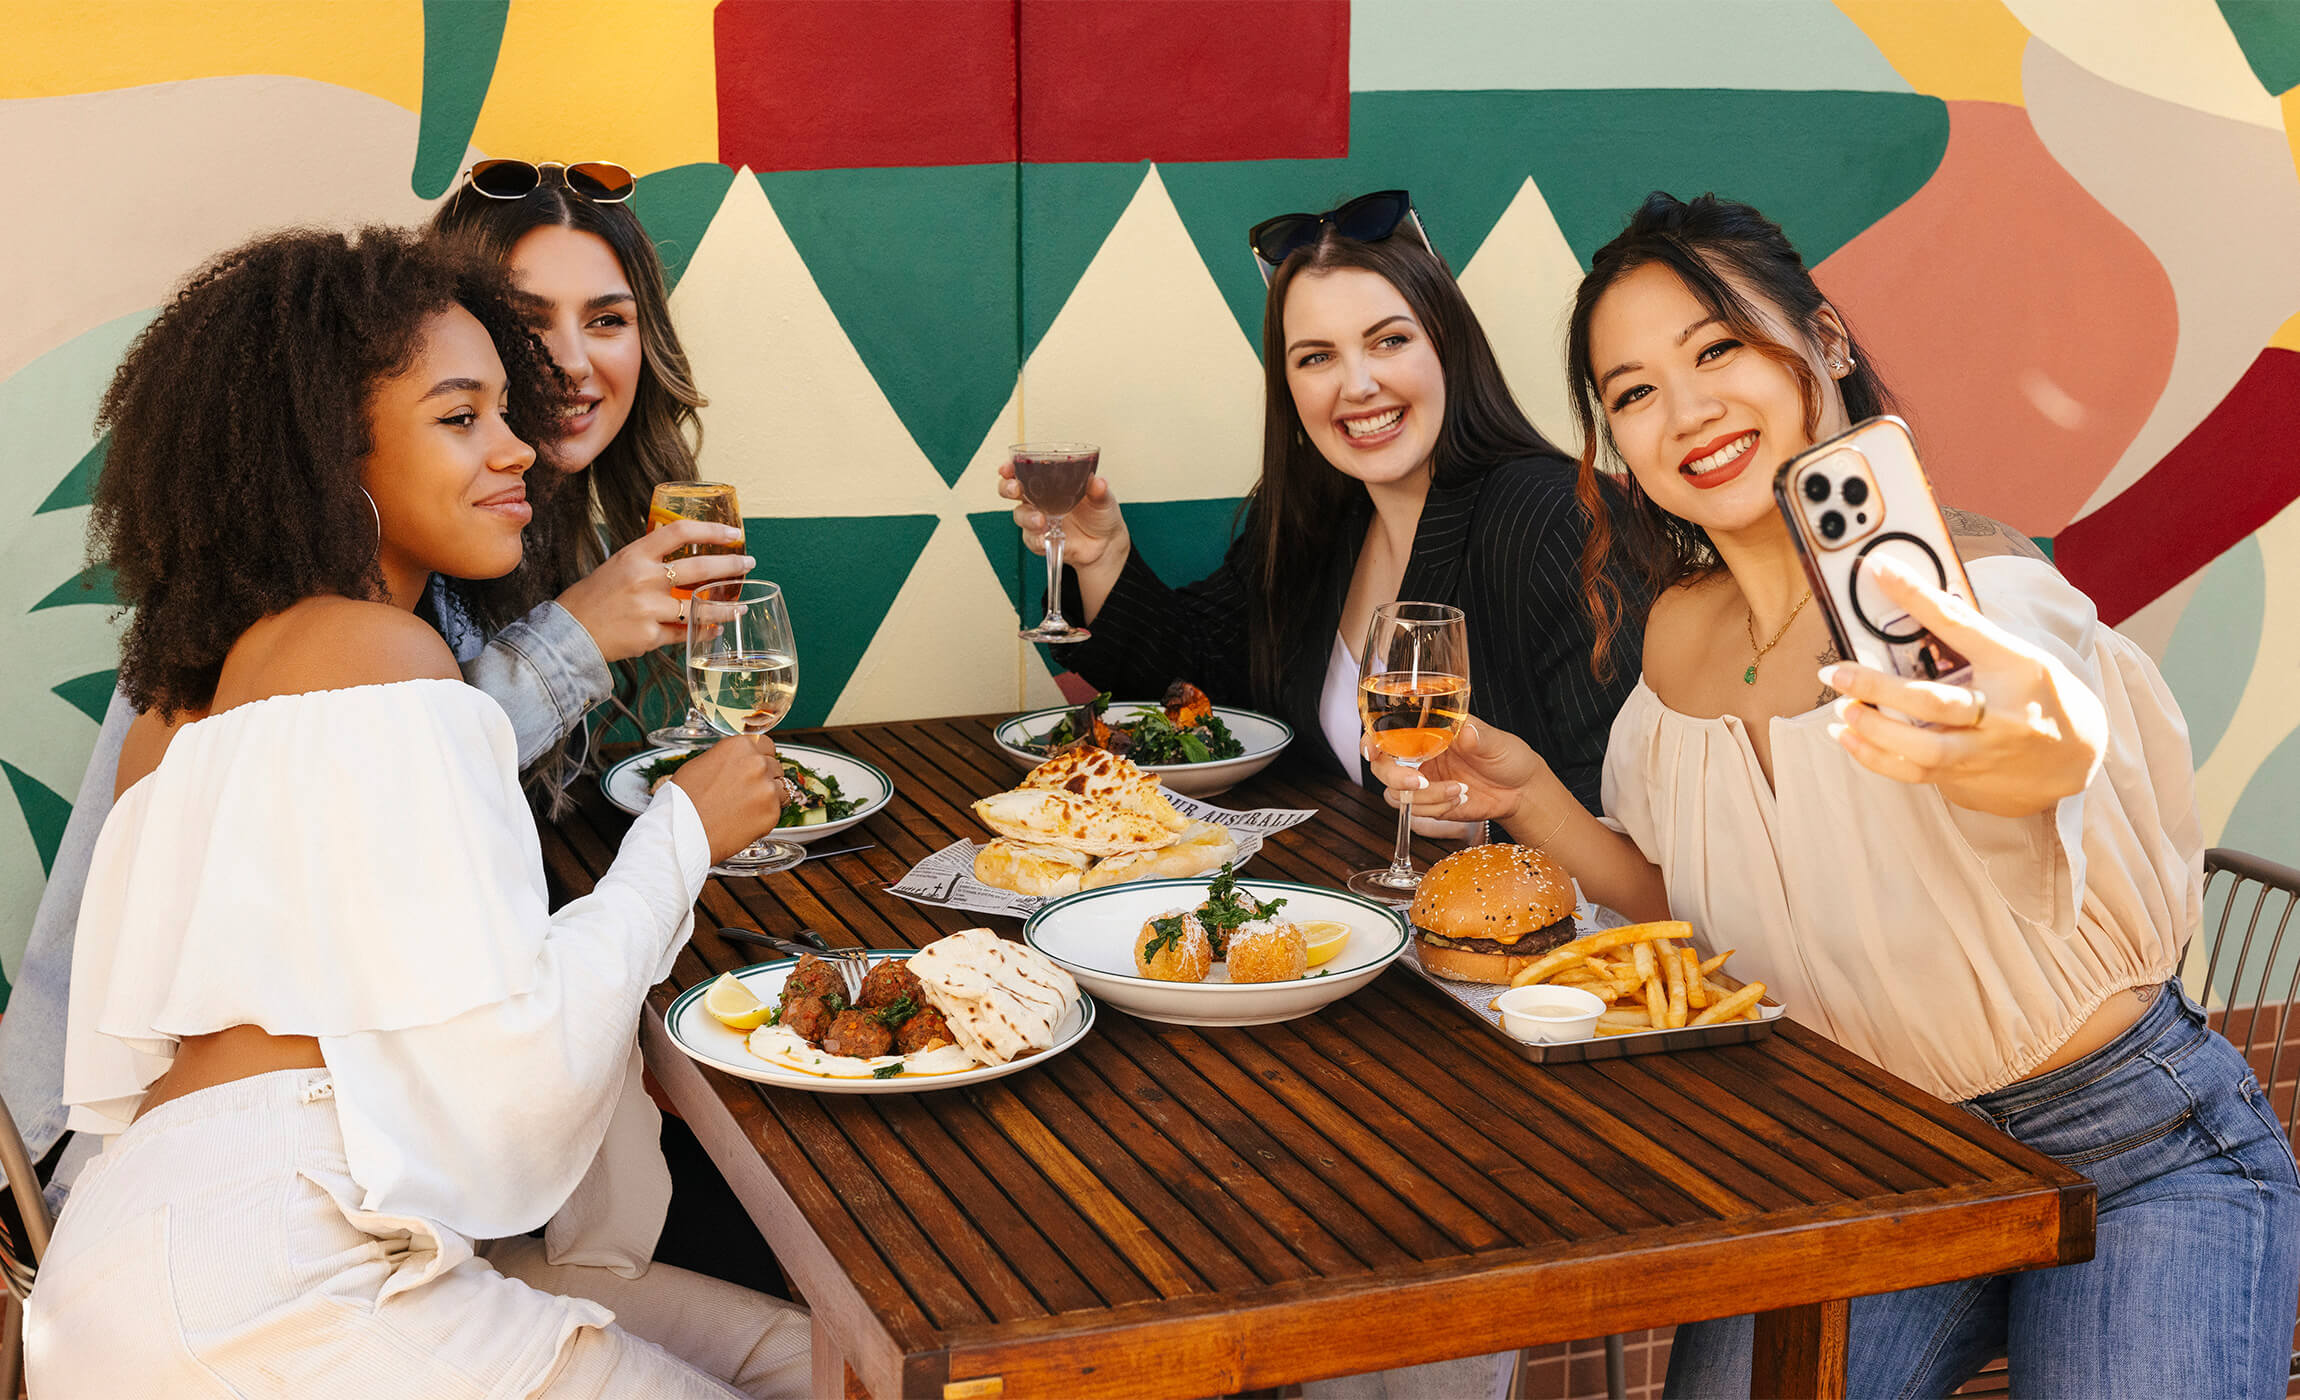 Four women enjoying a meal together at a restaurant, sharing laughter and good times.